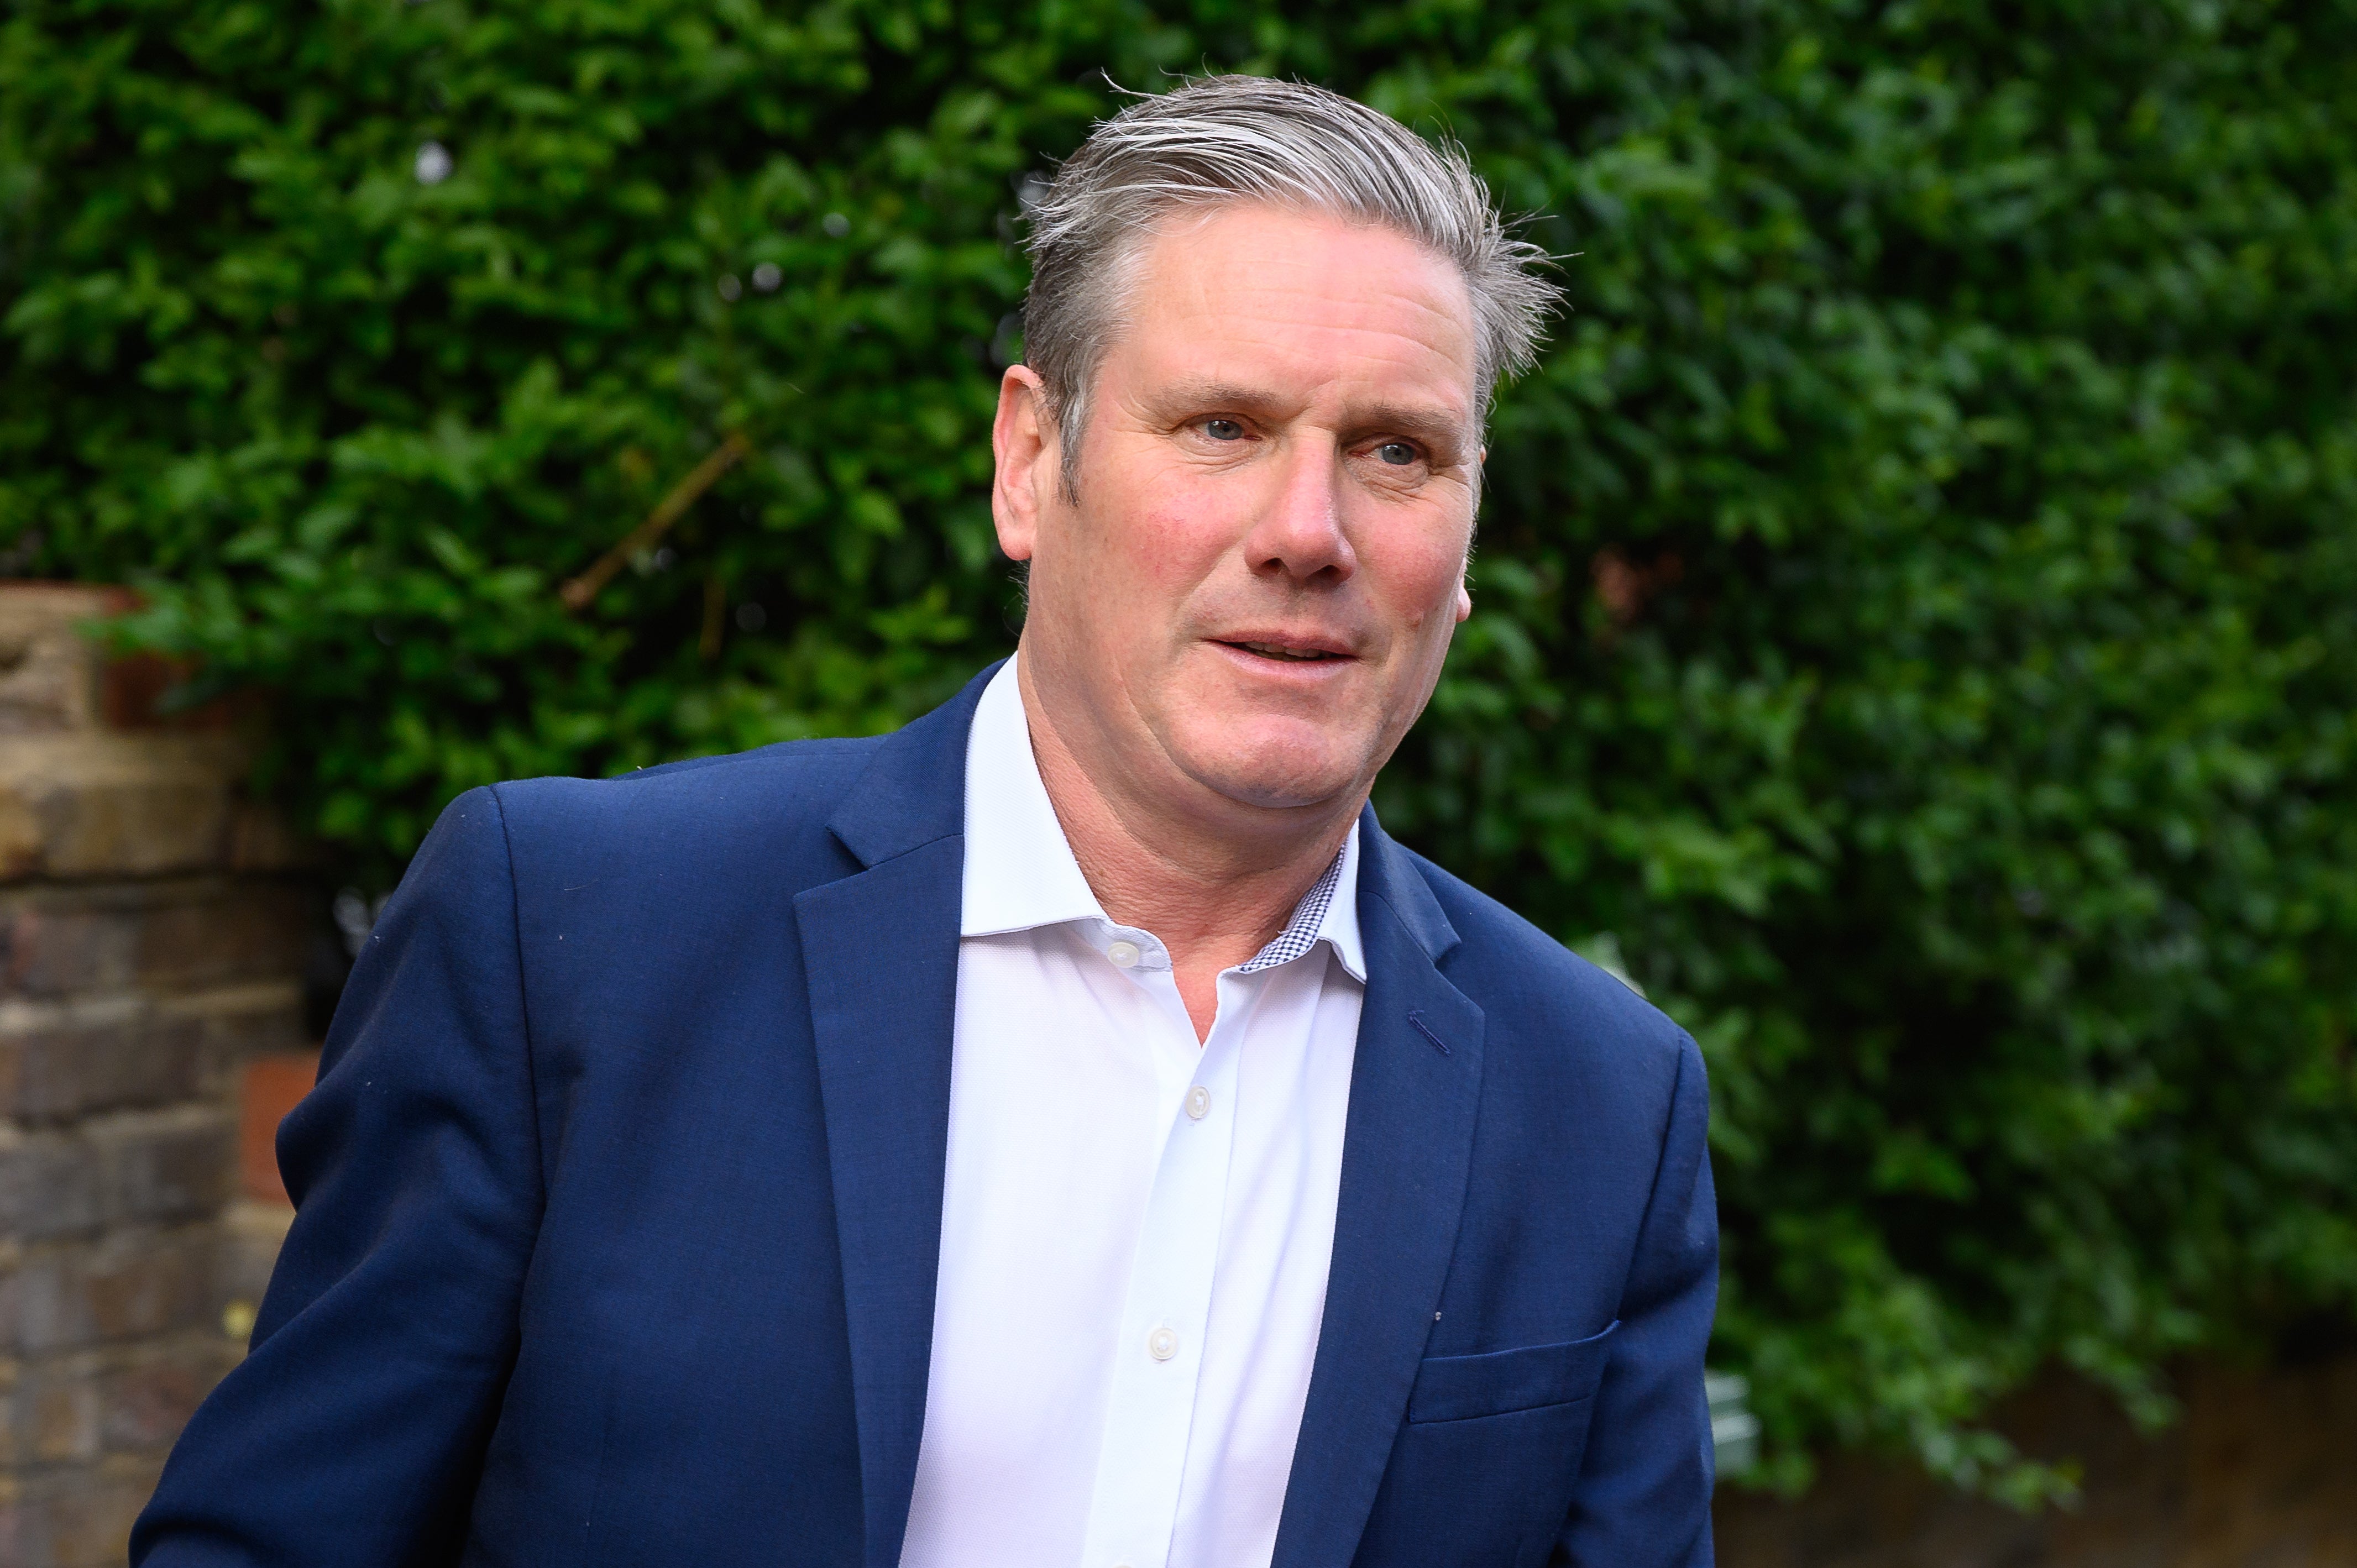 The new poll, conducted by YouGov, had Starmer’s party on 28 per cent